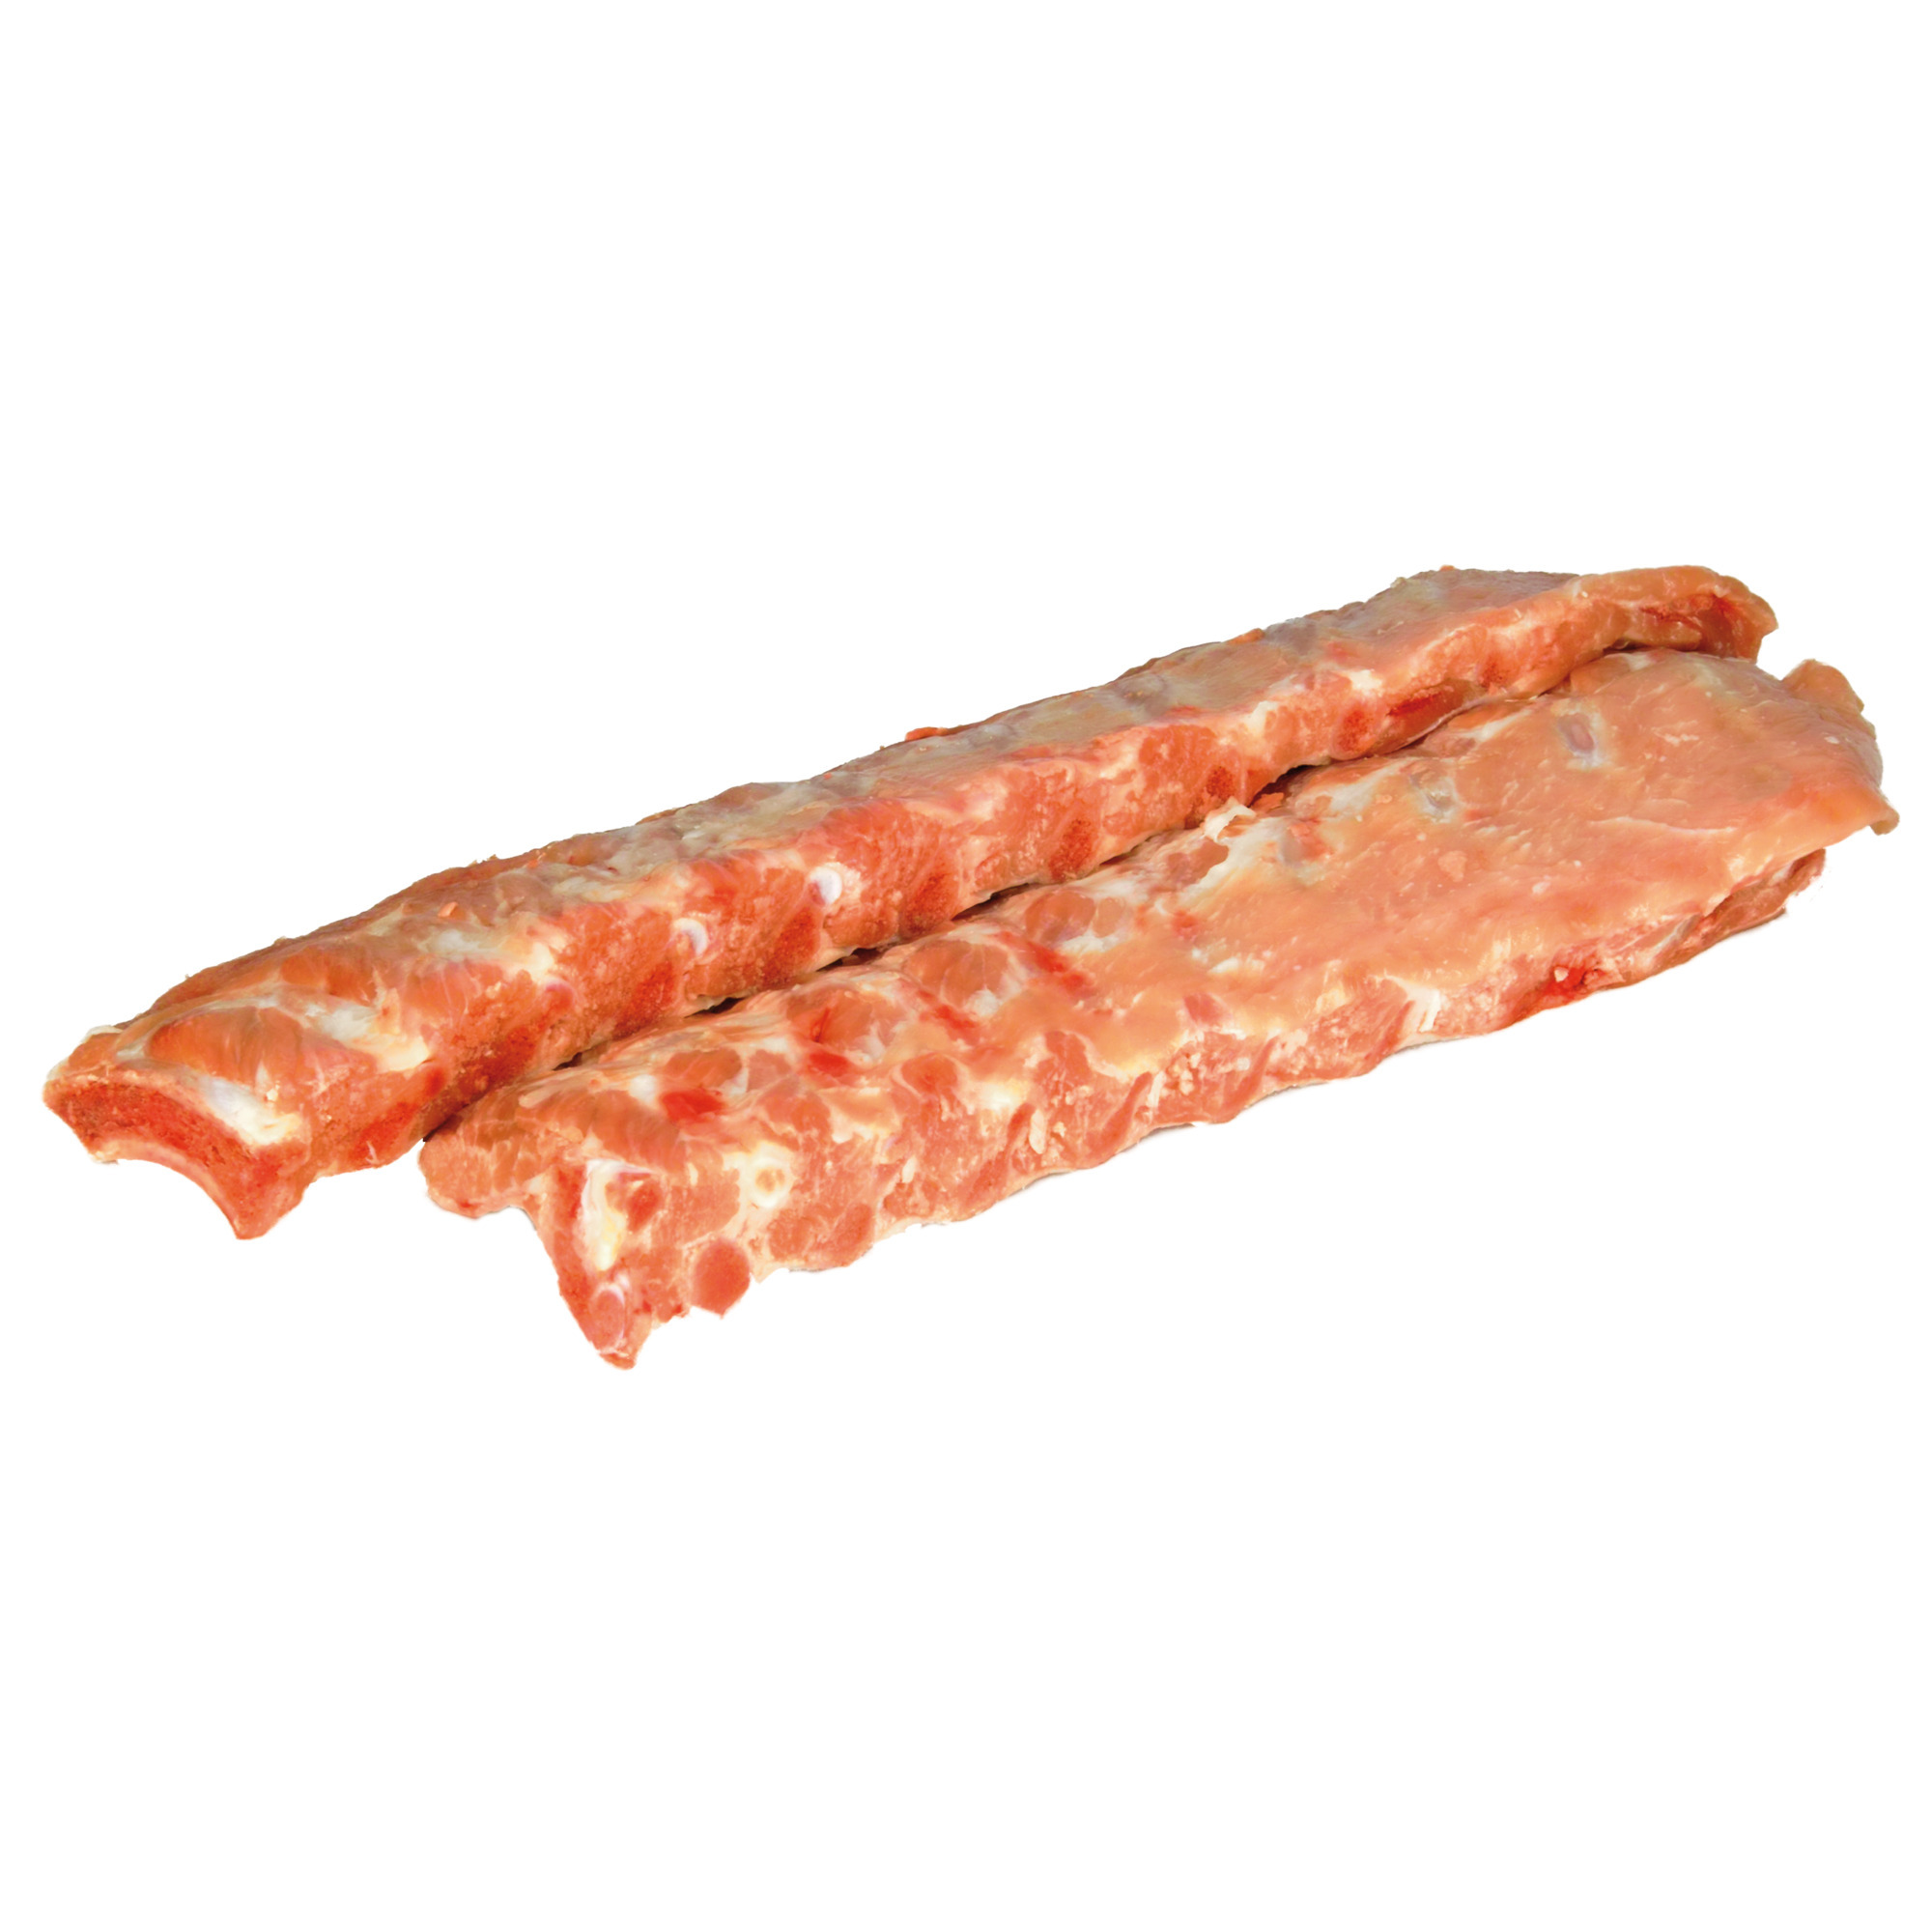 S-Spare Ribs TK 10kg